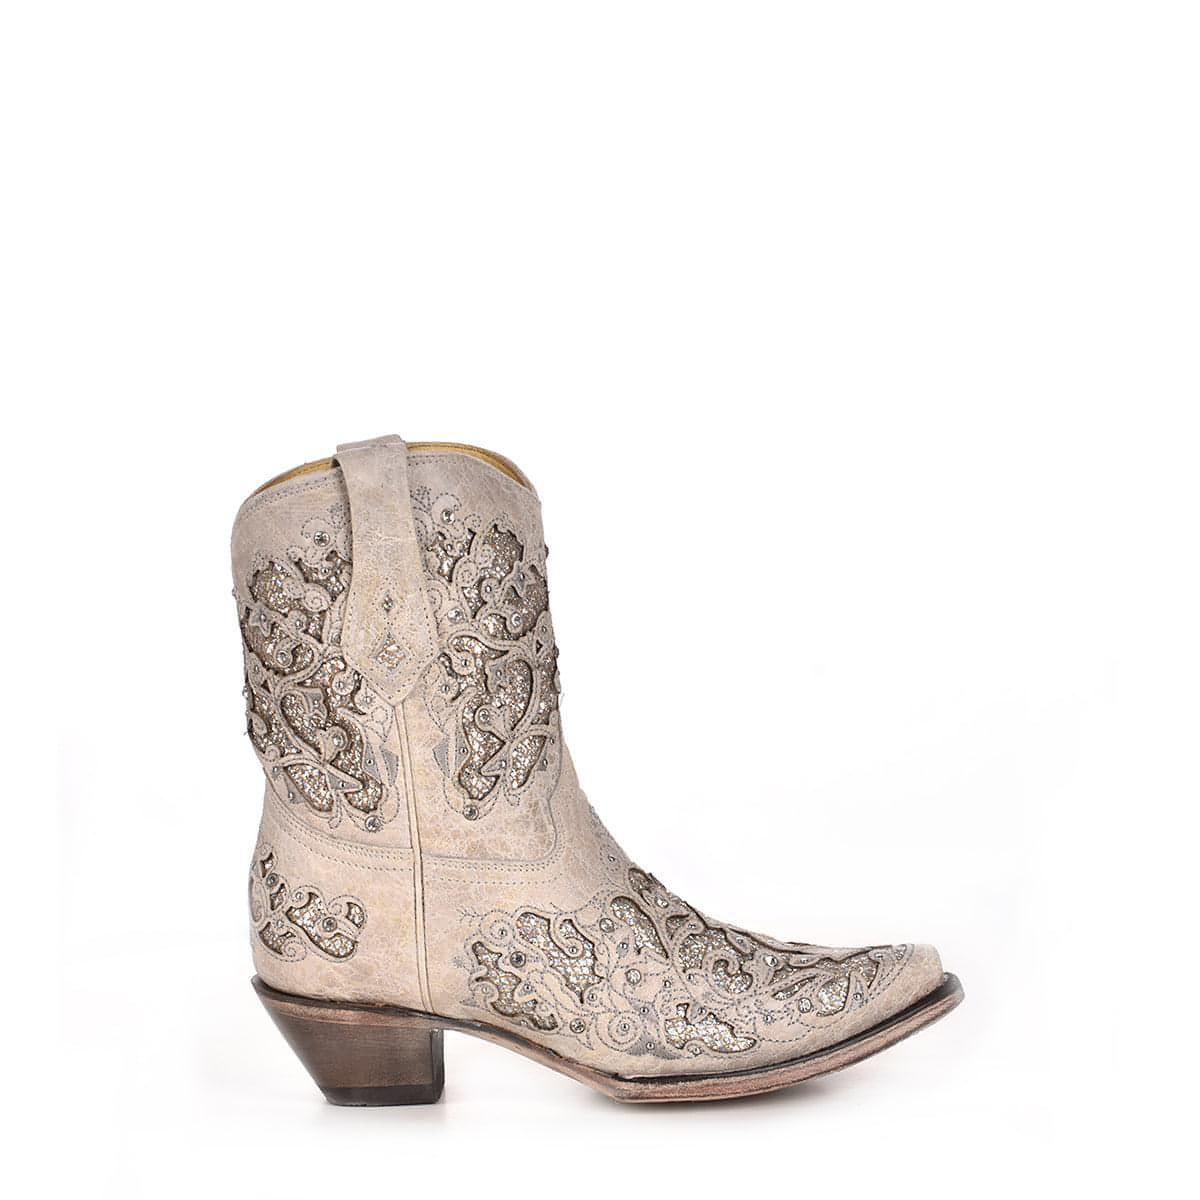 Collie Cowgirl Bridal Ankle Boots in Grey